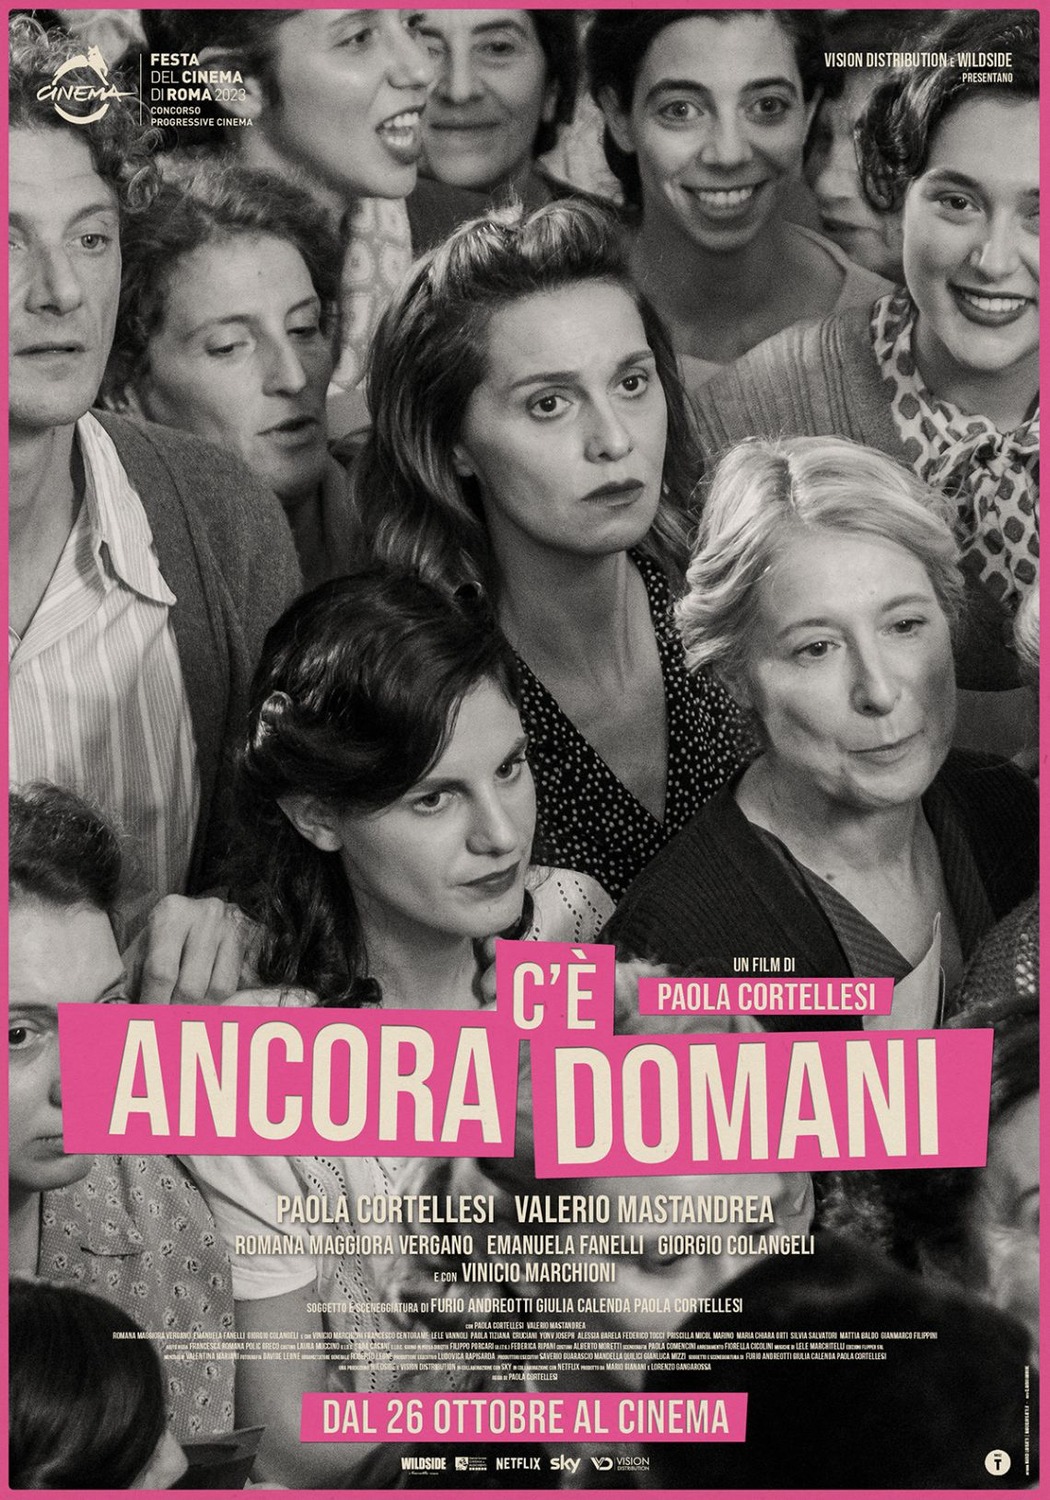 Extra Large Movie Poster Image for C'è ancora domani (#1 of 2)